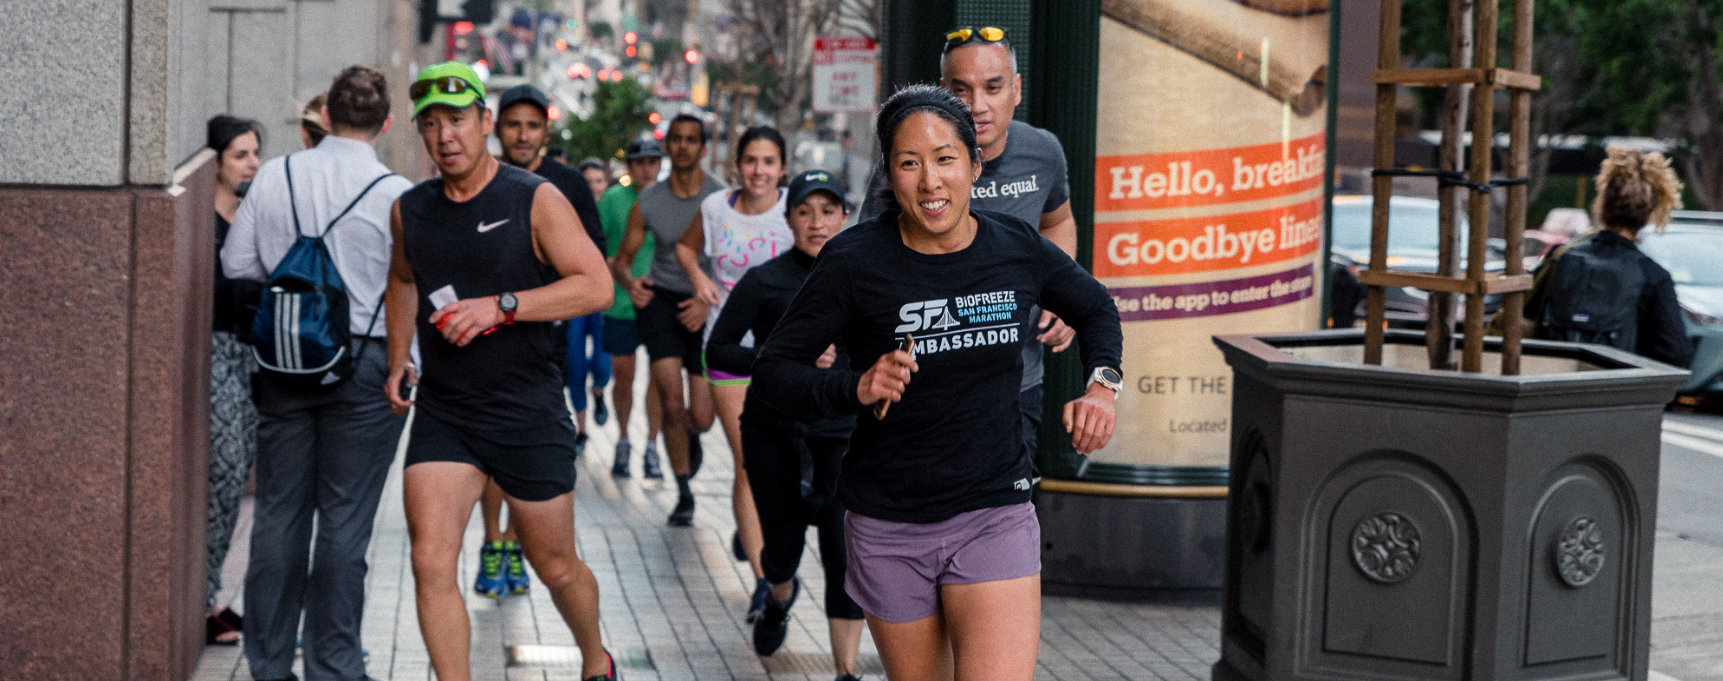 6 Best Things About Running With Your Friends - The San Francisco Marathon